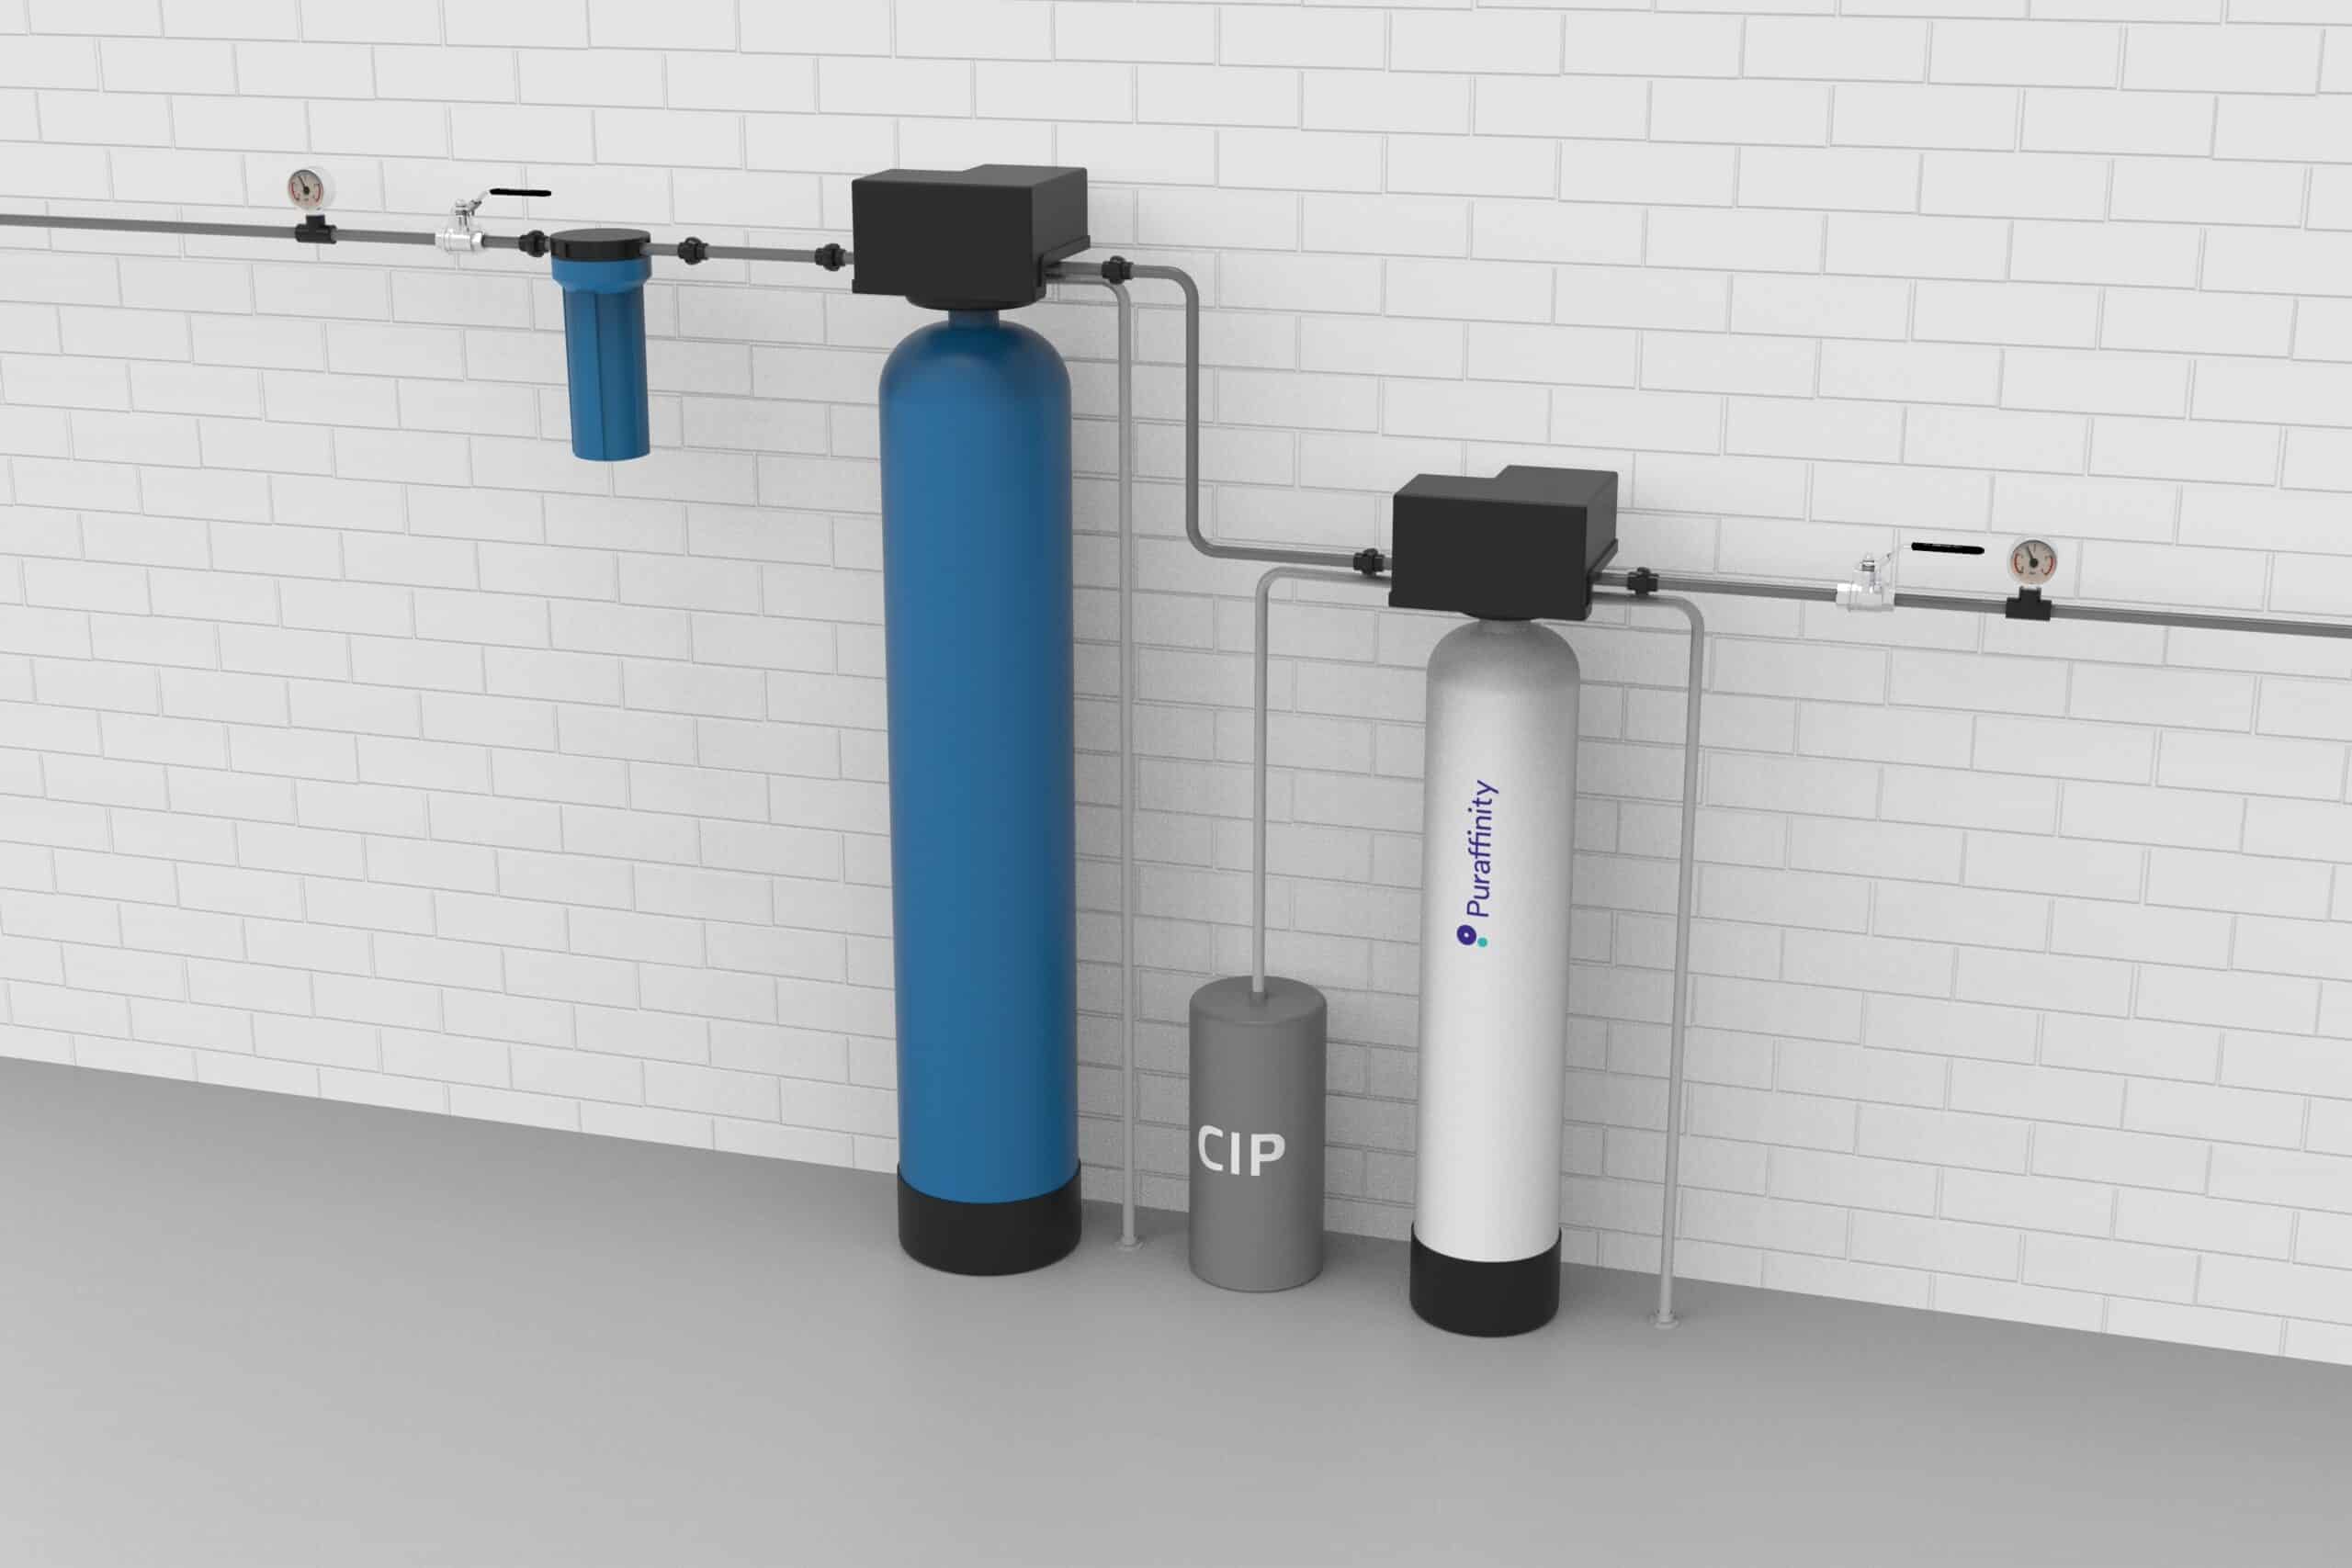 Full household Purrafinity system, able to handle PFAS treatment for 100k gallons of water.